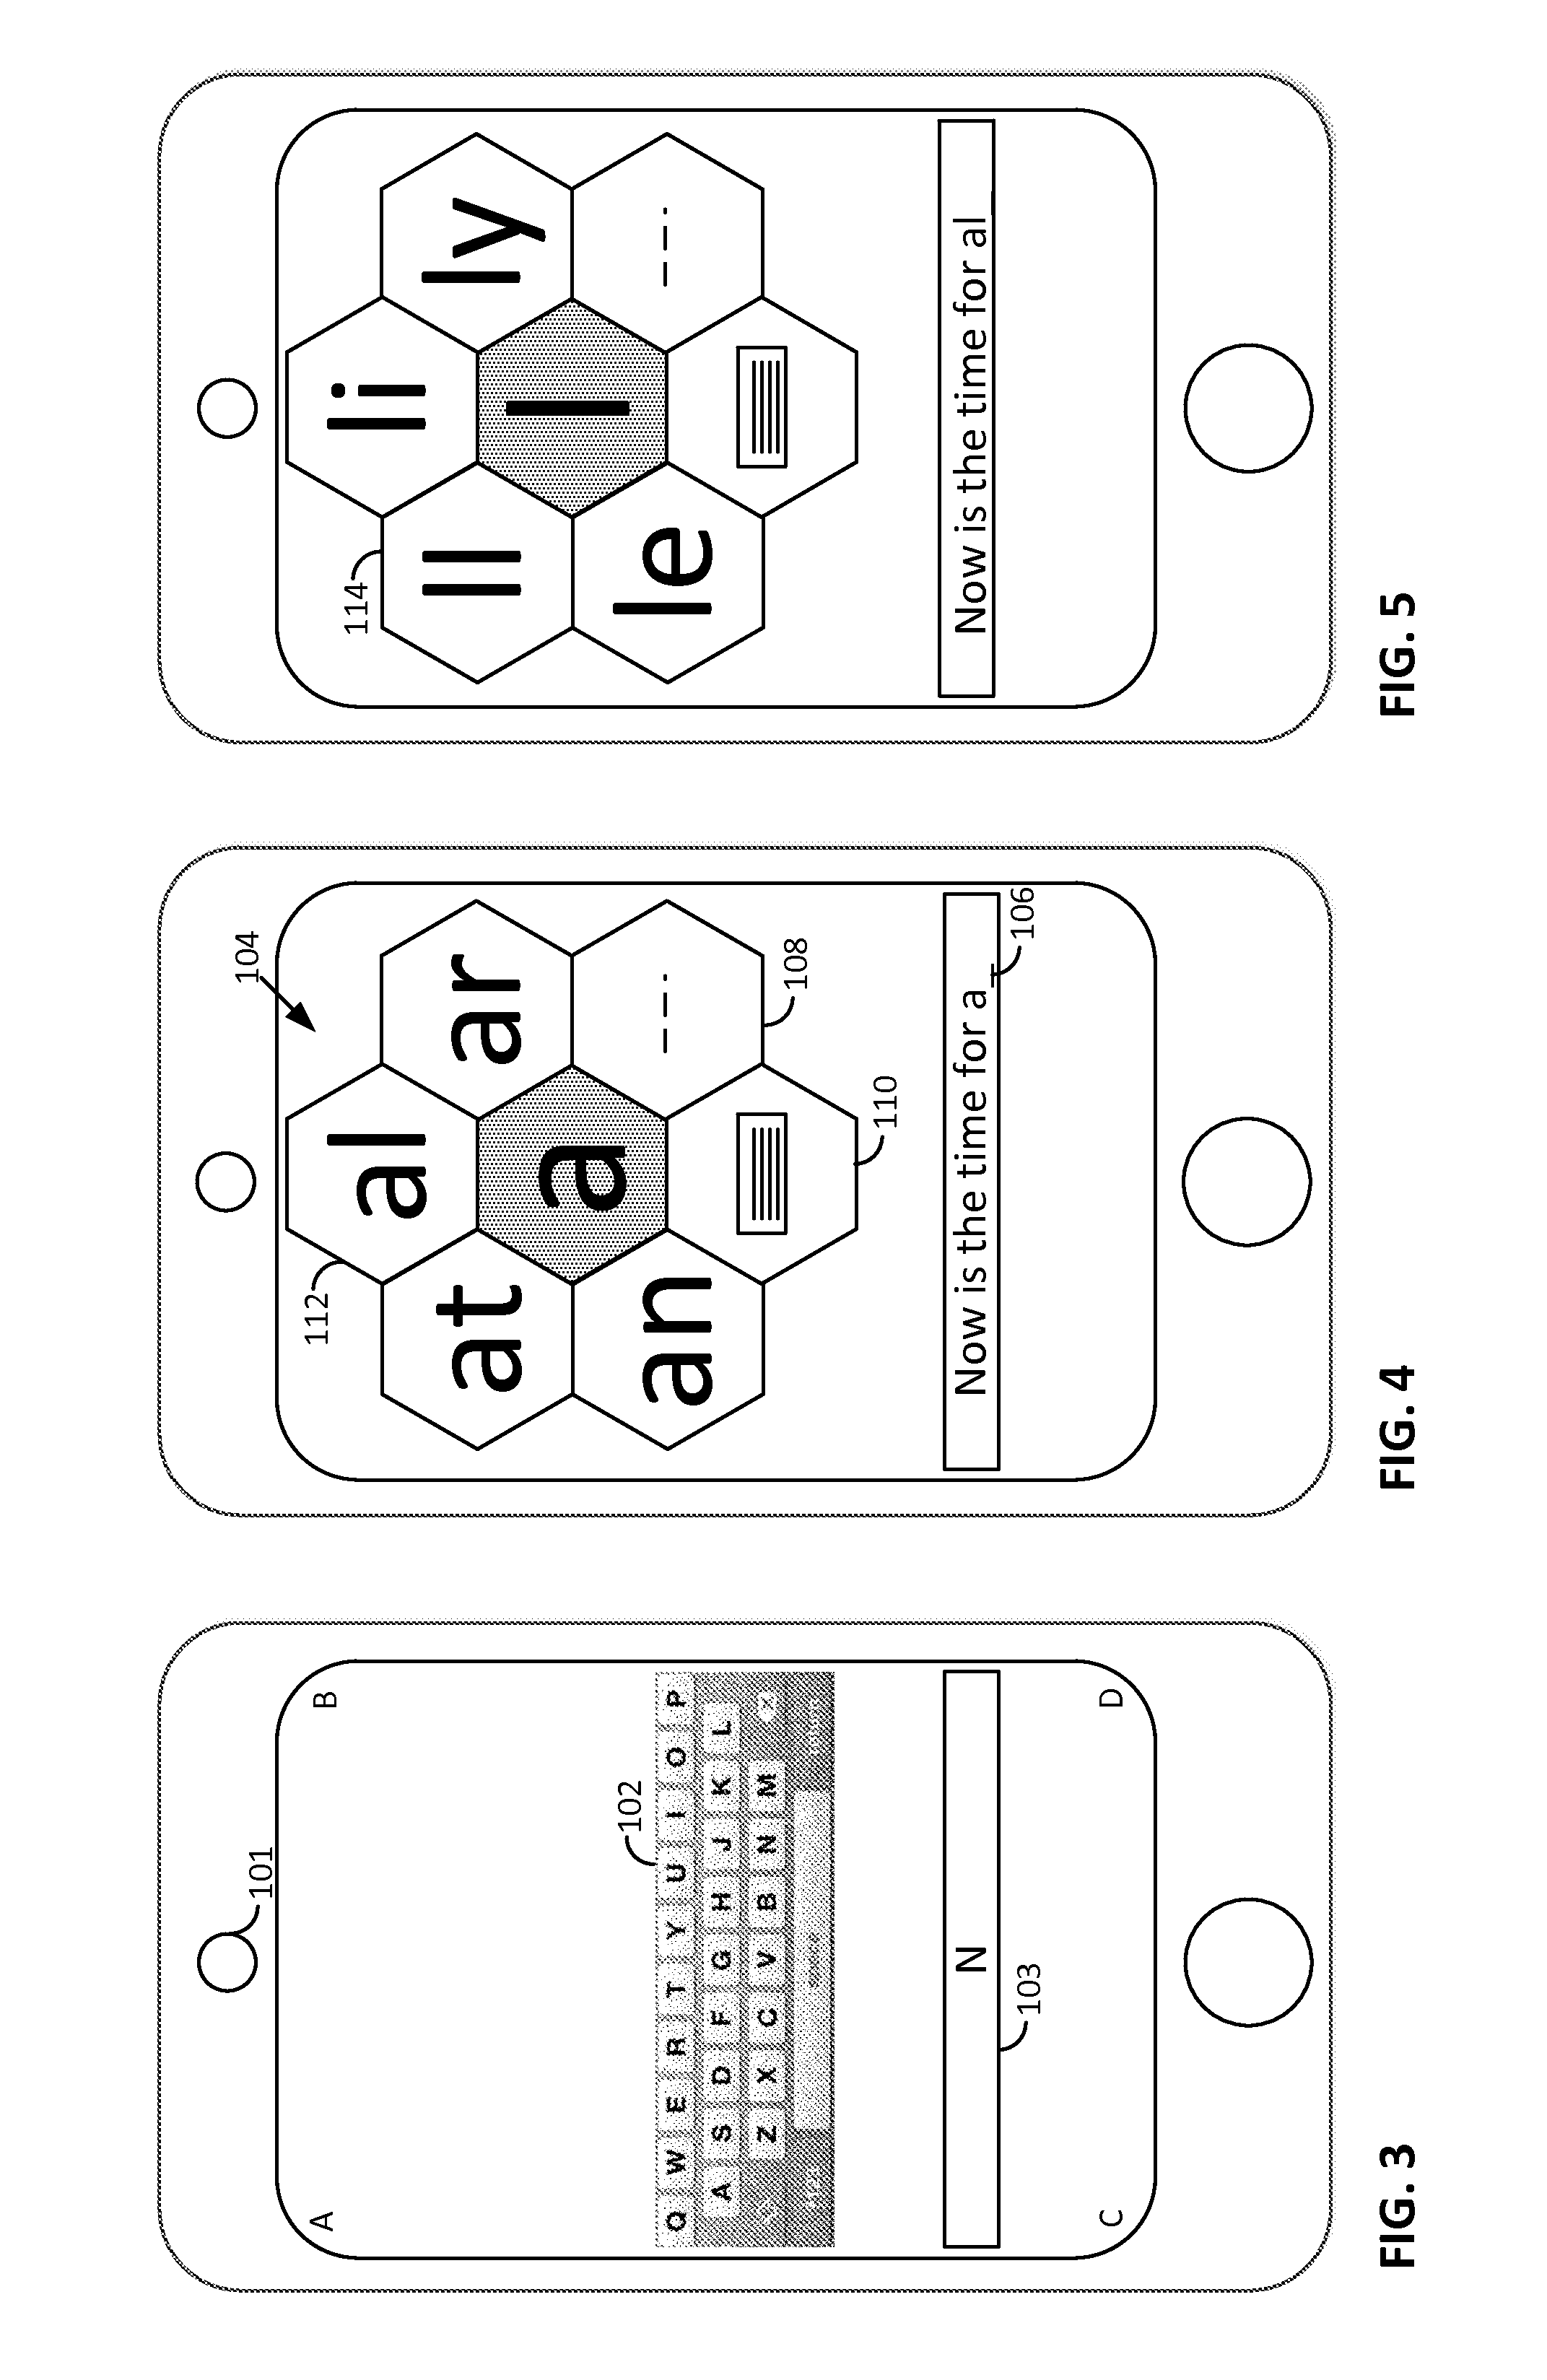 Smartphone-based methods and systems